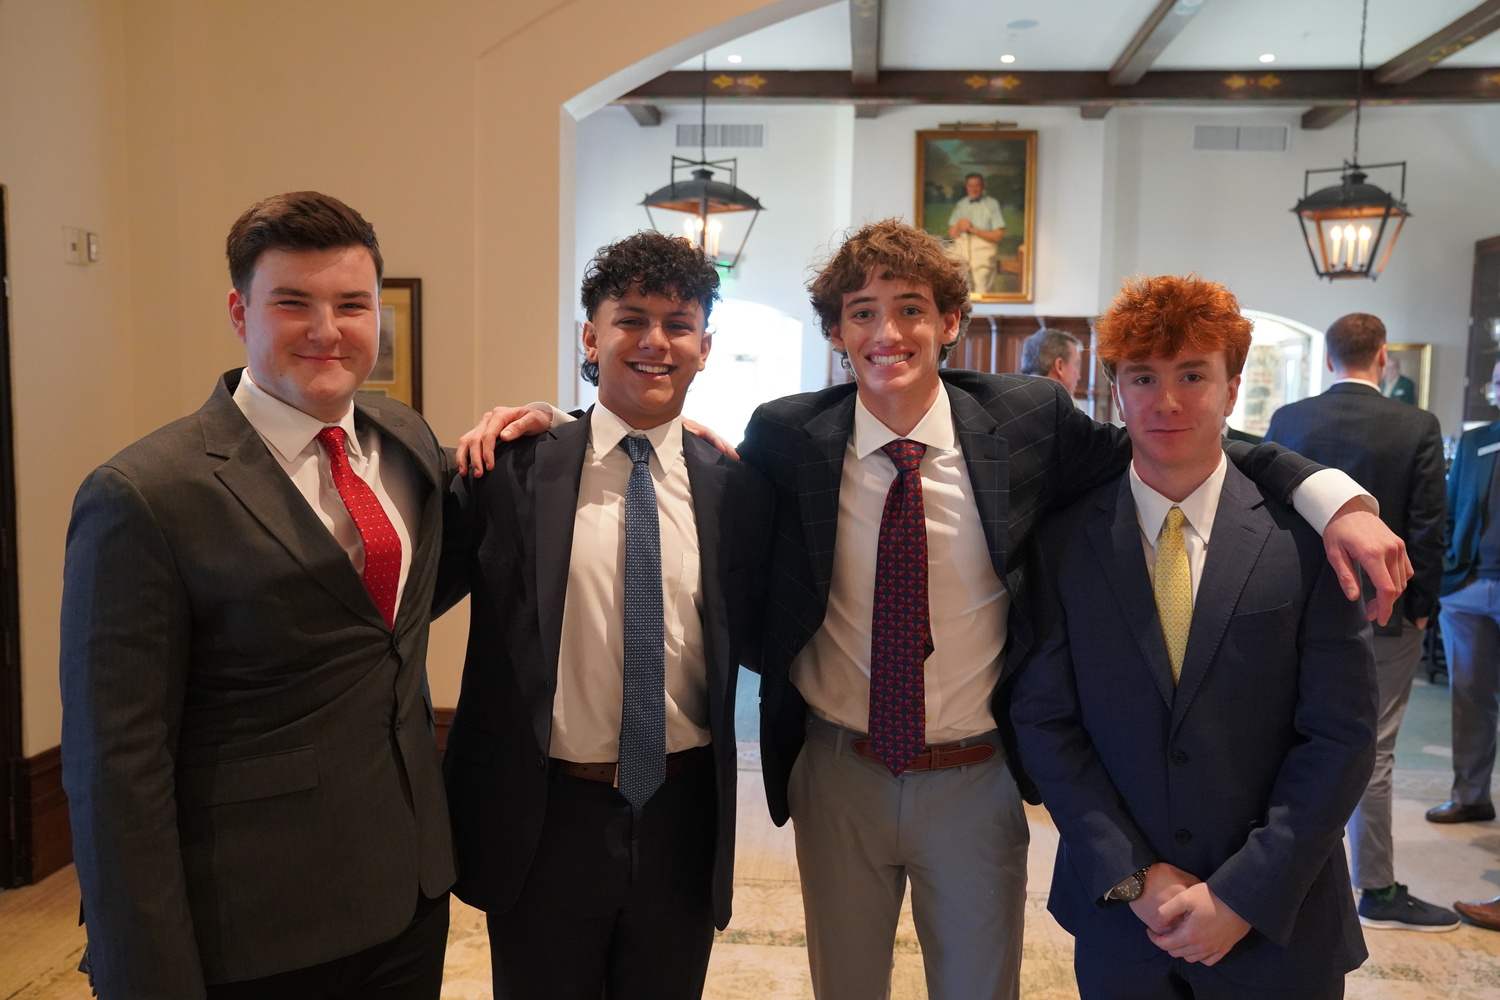 Michael Poremba, left, with the other three Long Island high school seniors who were selected for the Evans Scholarship, which included Joseph Mayal (St. Anthony's High School) and Colin Lynch and Luke Richard, both of Riverhead High School.    WESTERN GOLF ASSOCIATION